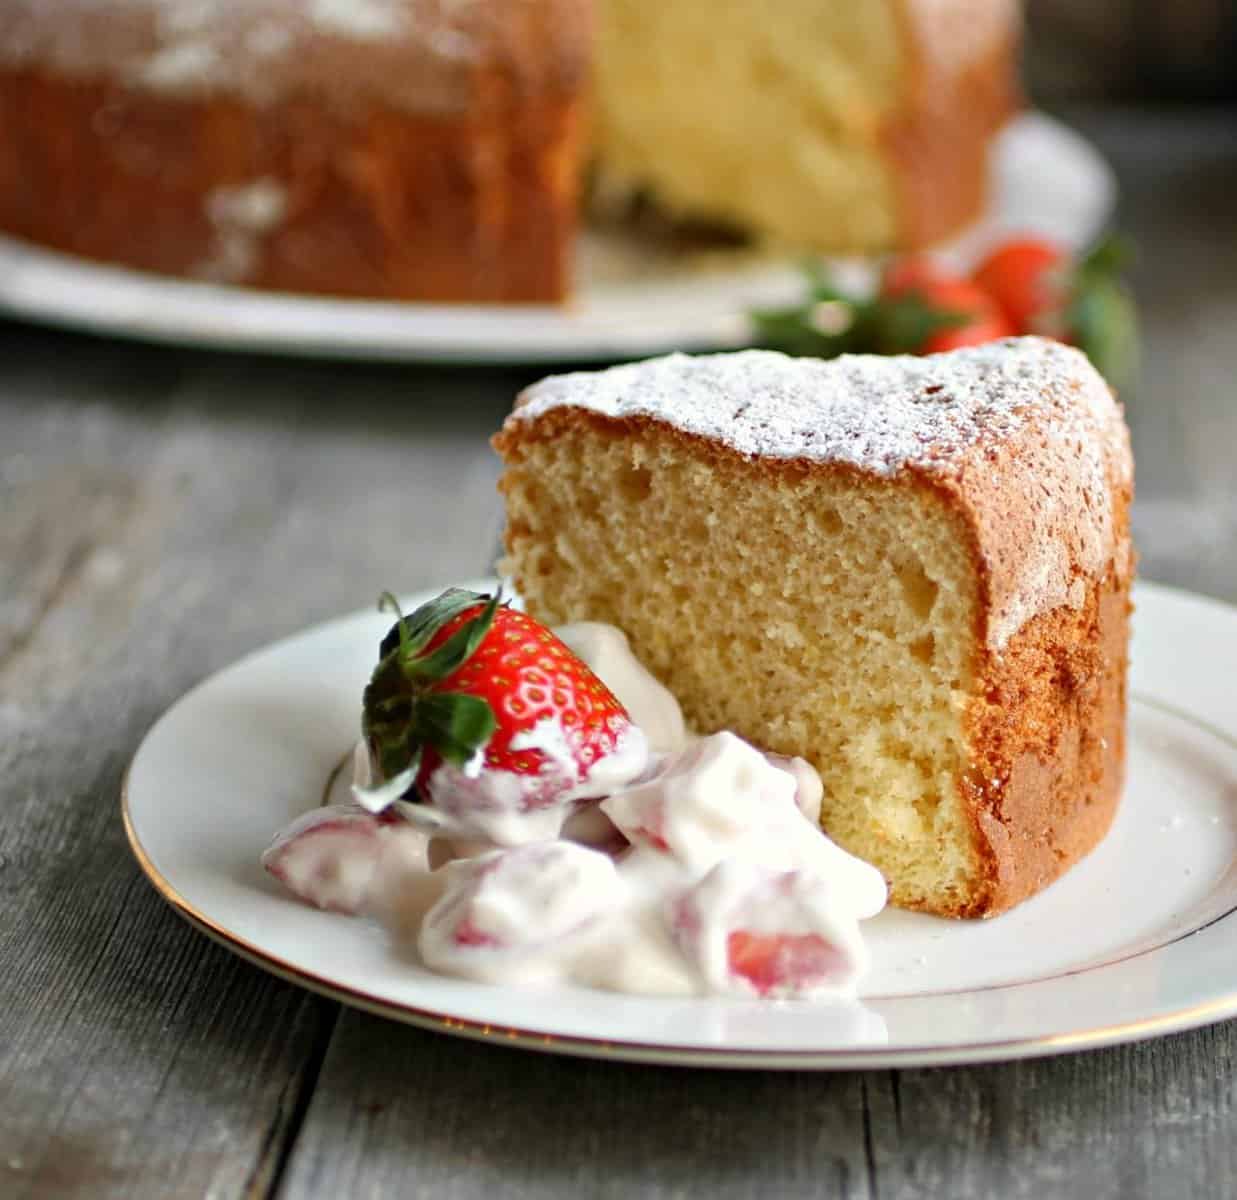  Each bite of this sponge cake is full of vanilla flavor and melts in your mouth.